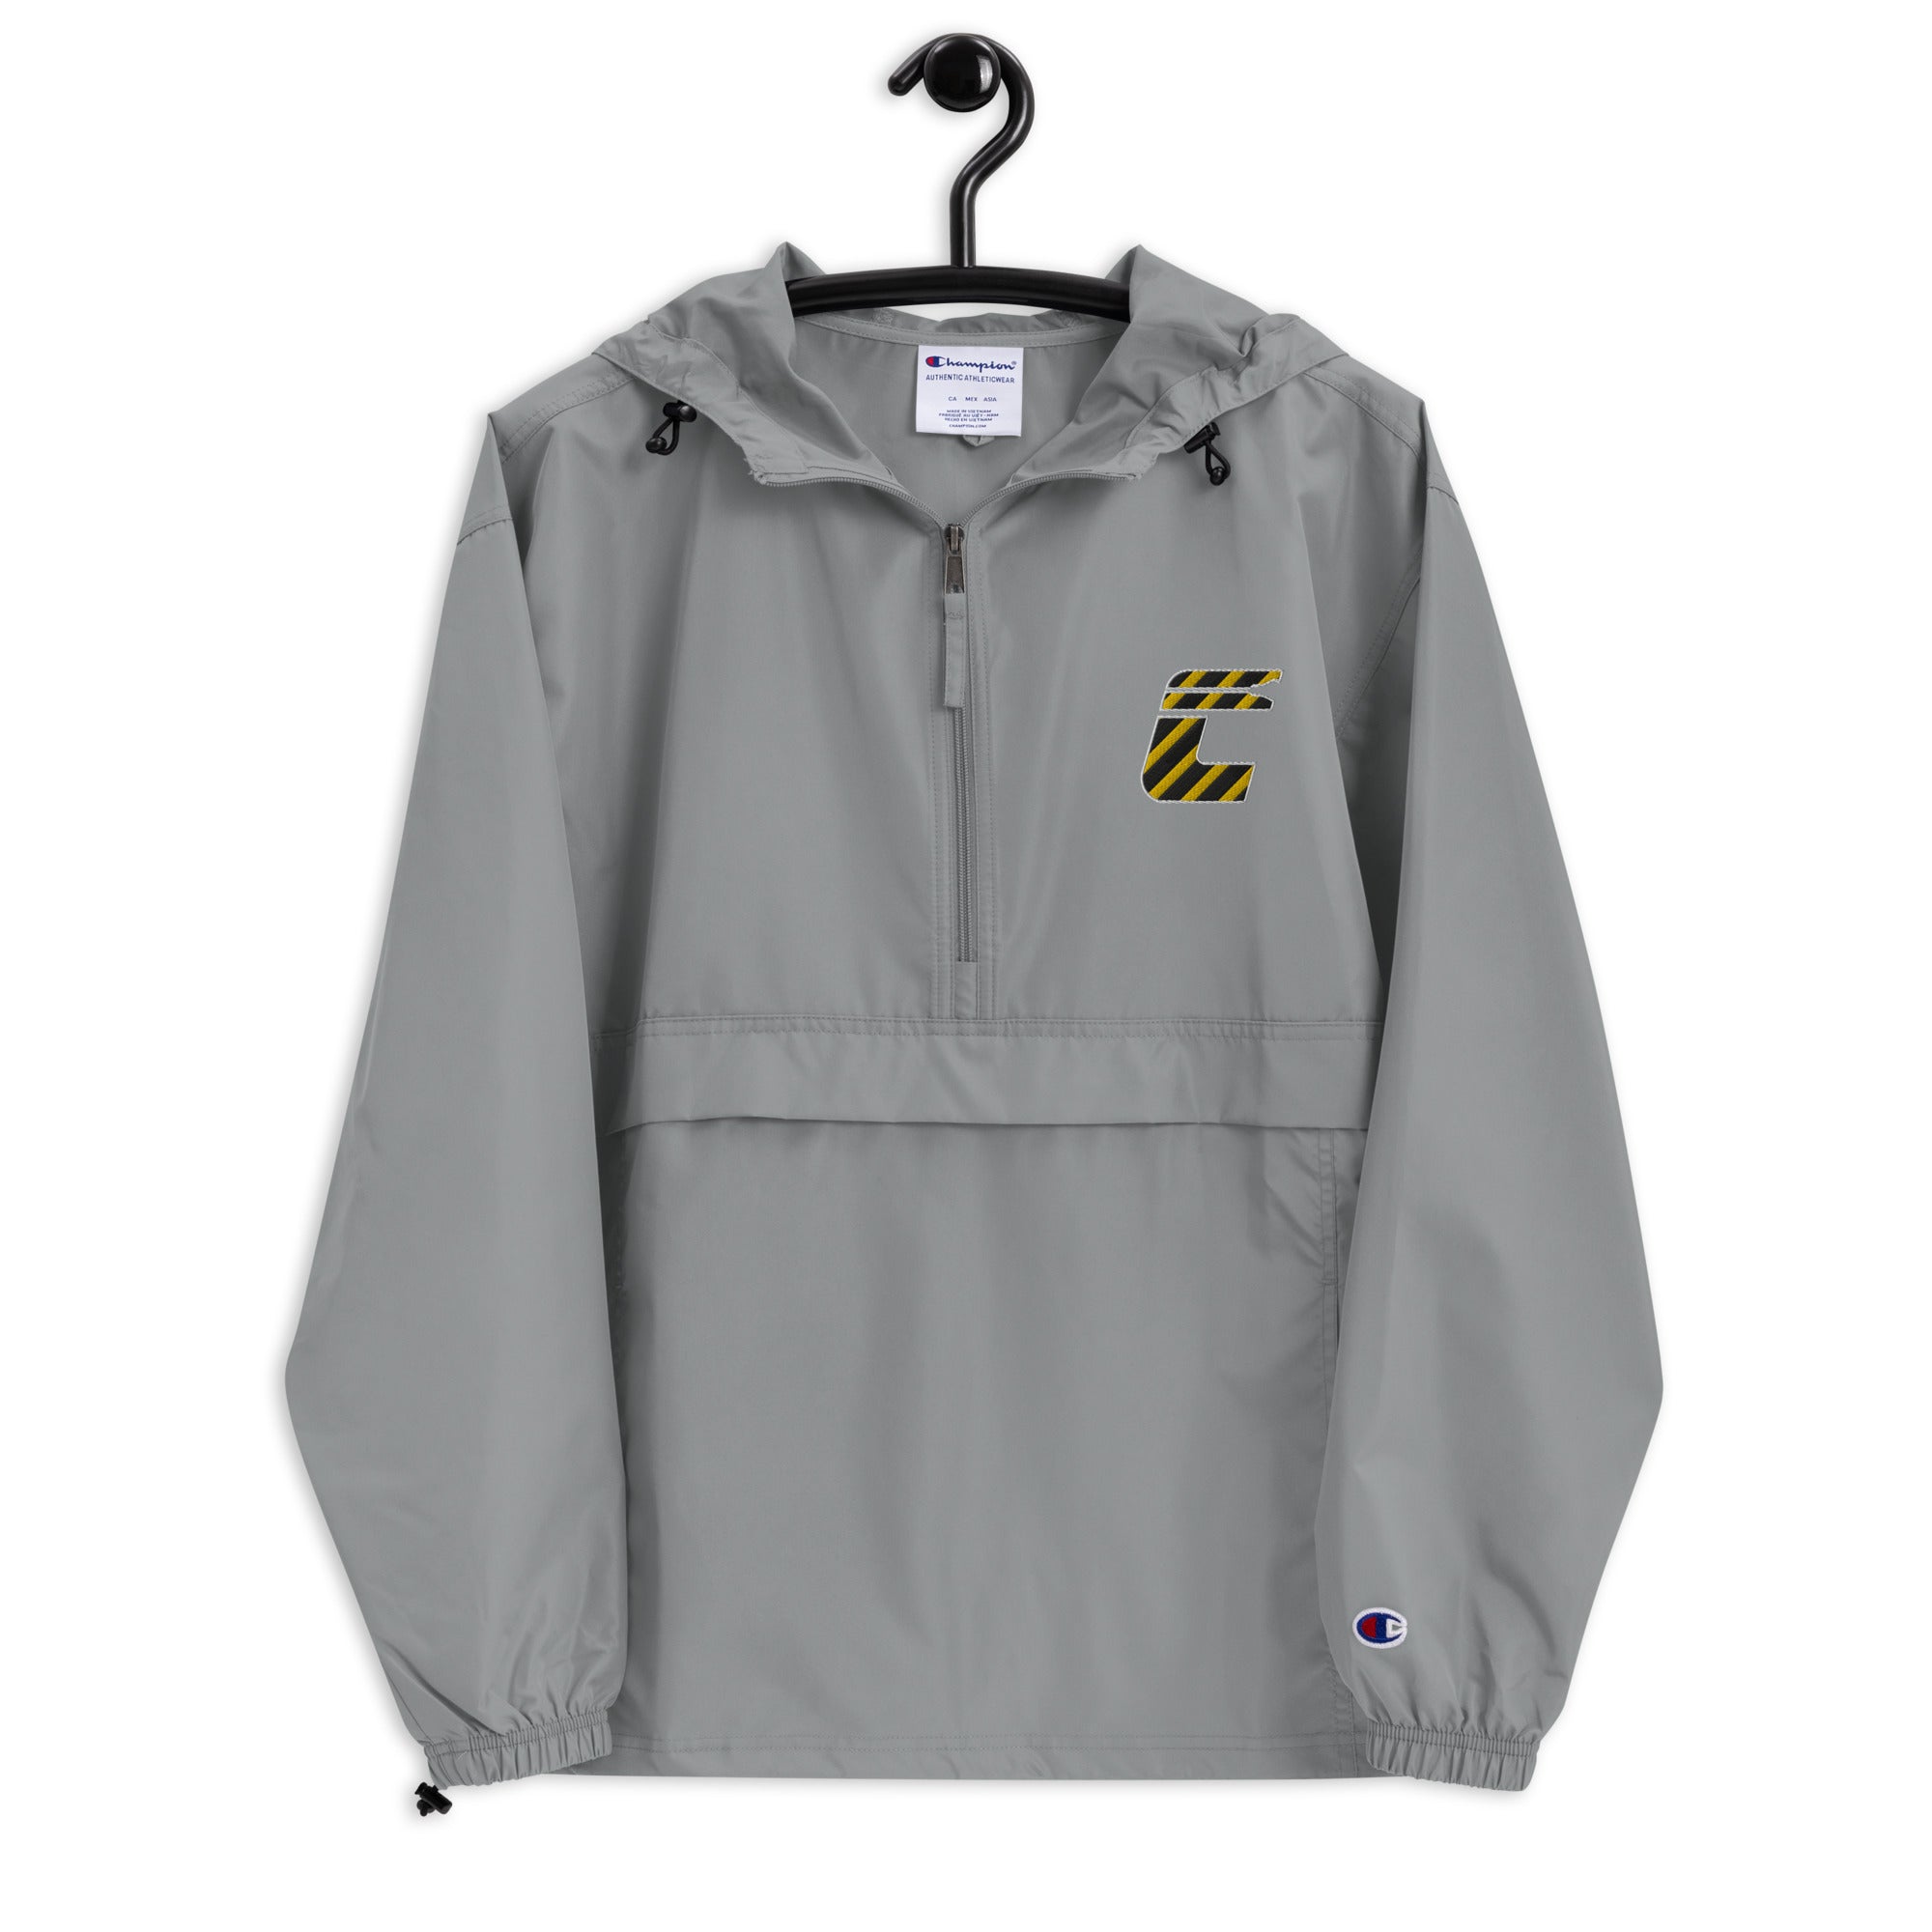 Construct Embroidered Champion Packable Jacket